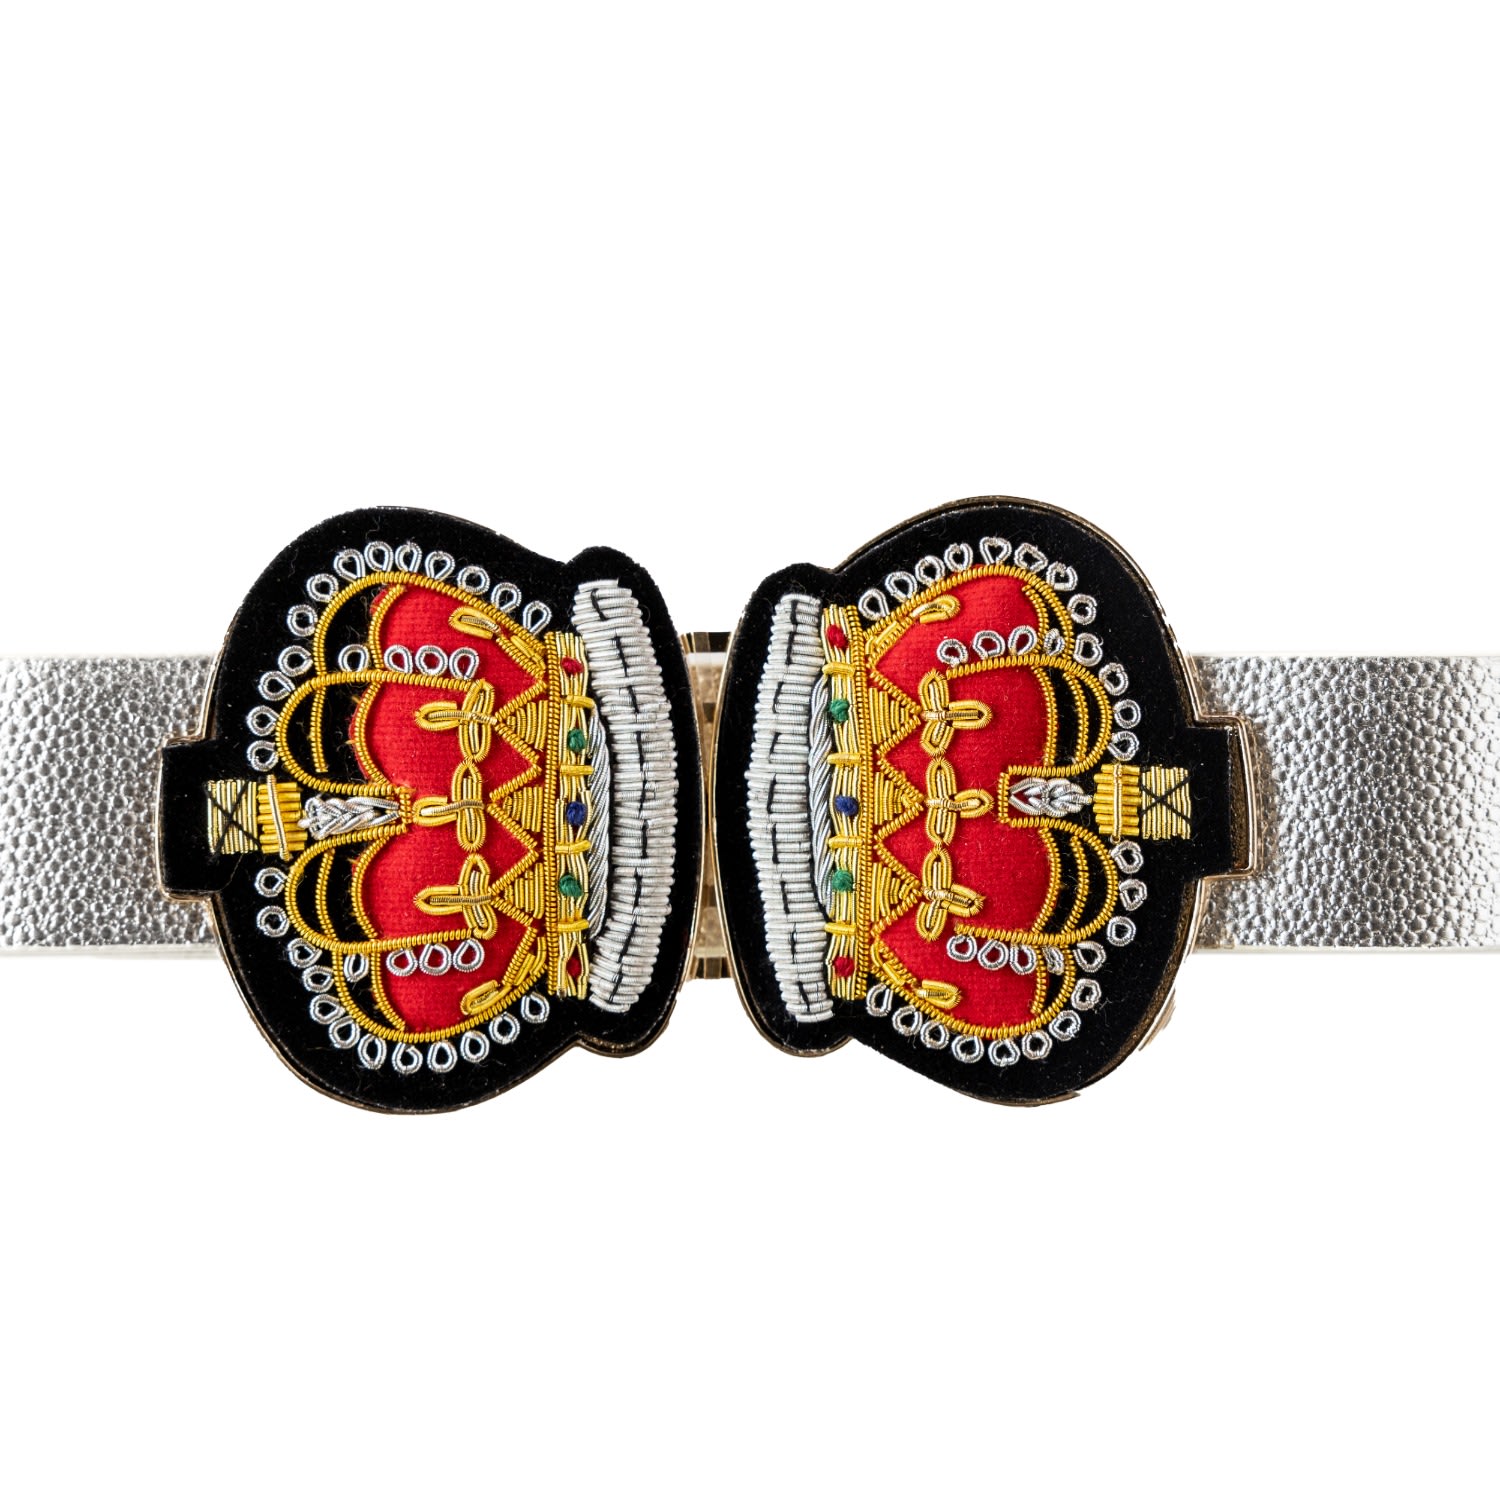 Women’s Silver Drama Queen Belt And Buckle Love, Ceil